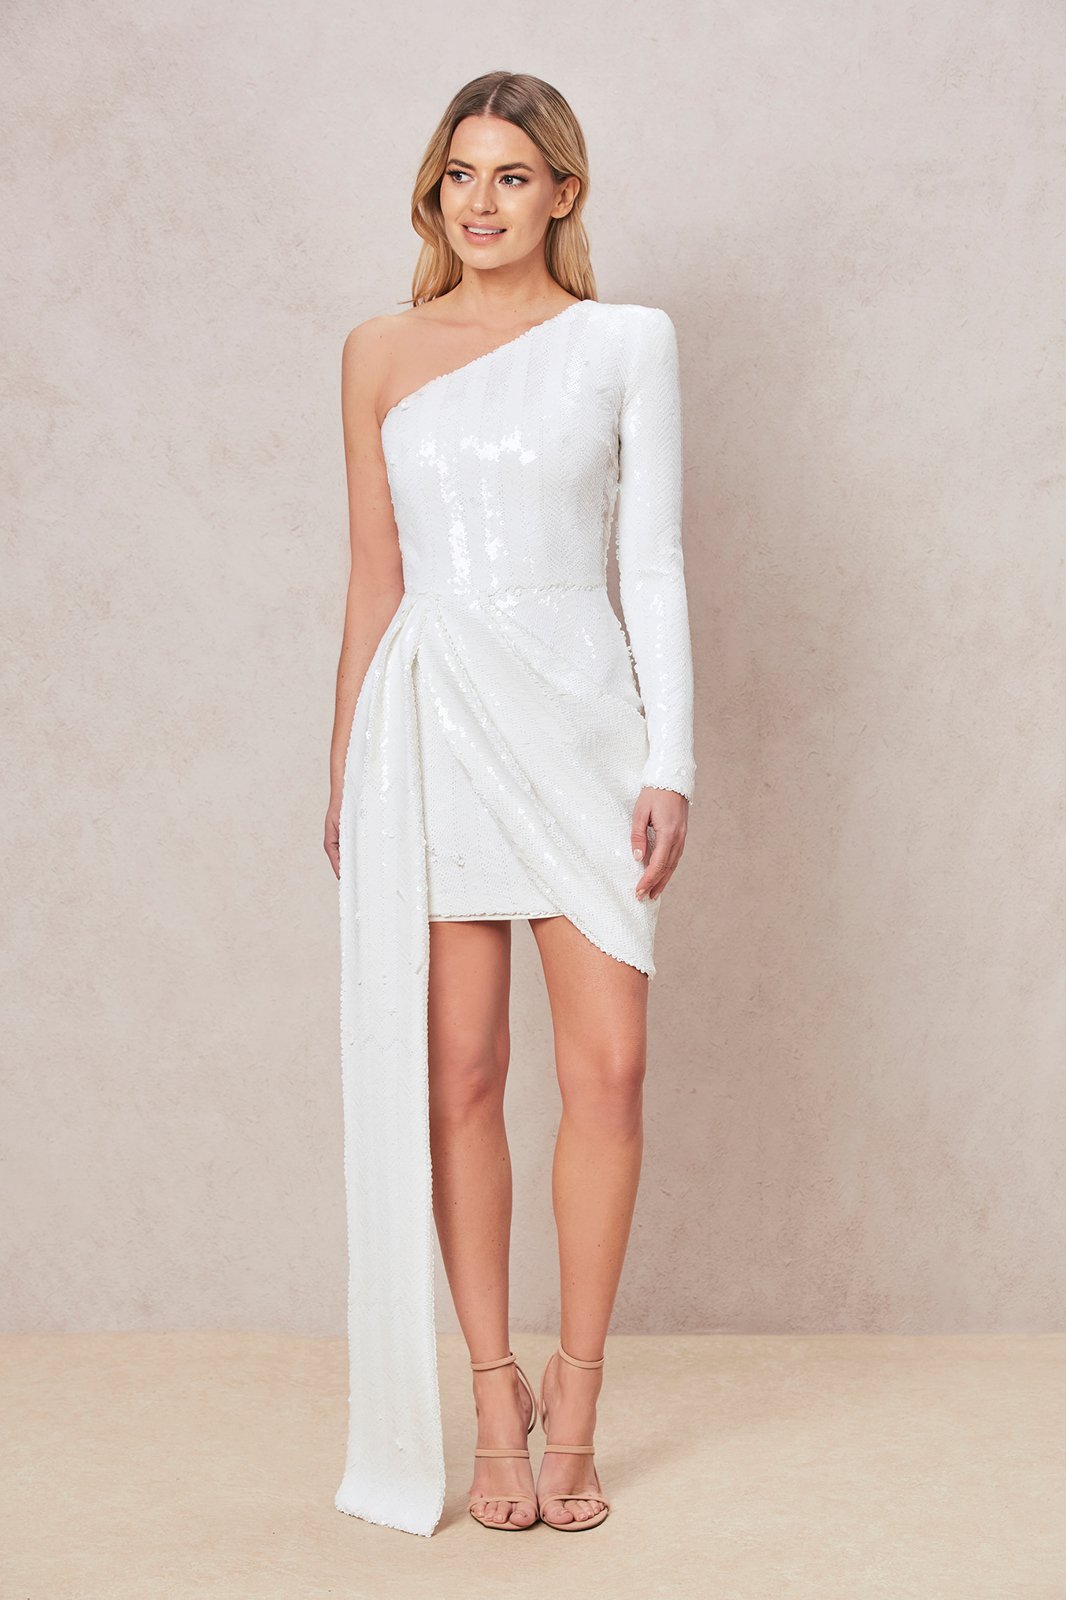 bride outfits, white outfits, bridal fashion, rehearsal dinner dress, bachelorette party dress, wedding shower dress, bridal shower dress, rehearsal dinner outfit, 2021 bride, blogger bride, 2021 blogger bride, 2021 wedding, little white dress, white dress wedding, olivia rink wedding ideas, olivia rink wedding, olivia rink rehearsal